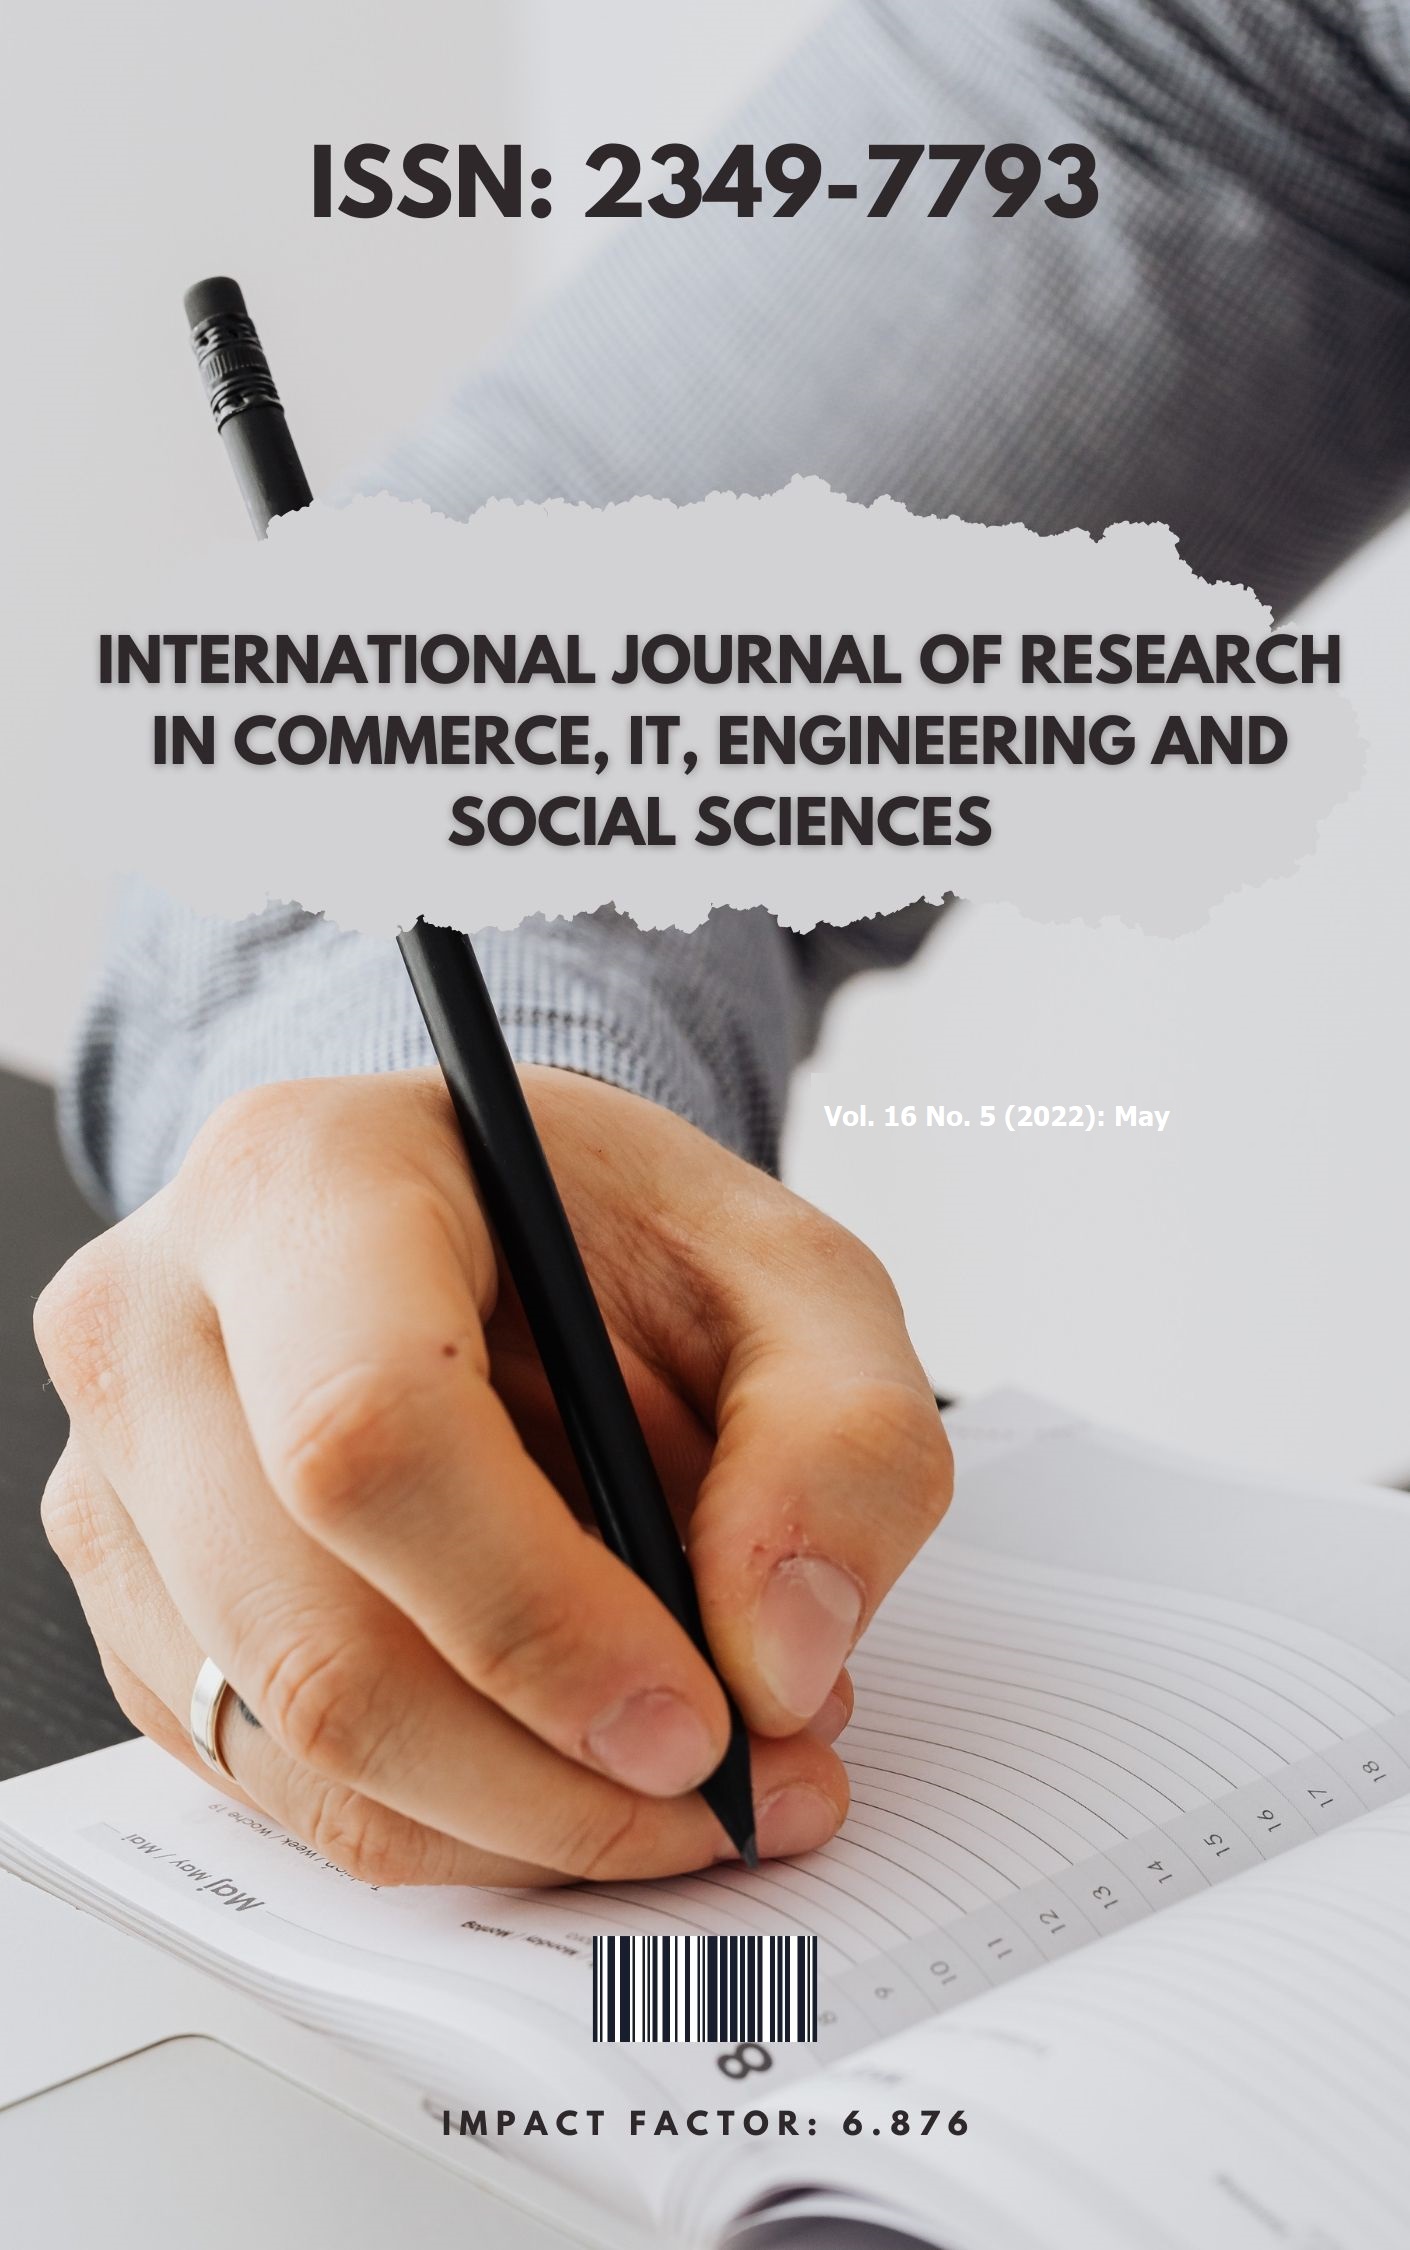 					View Vol. 16 No. 8 (2022): International Journal of Research in Commerce, IT, Engineering, and Social Sciences
				